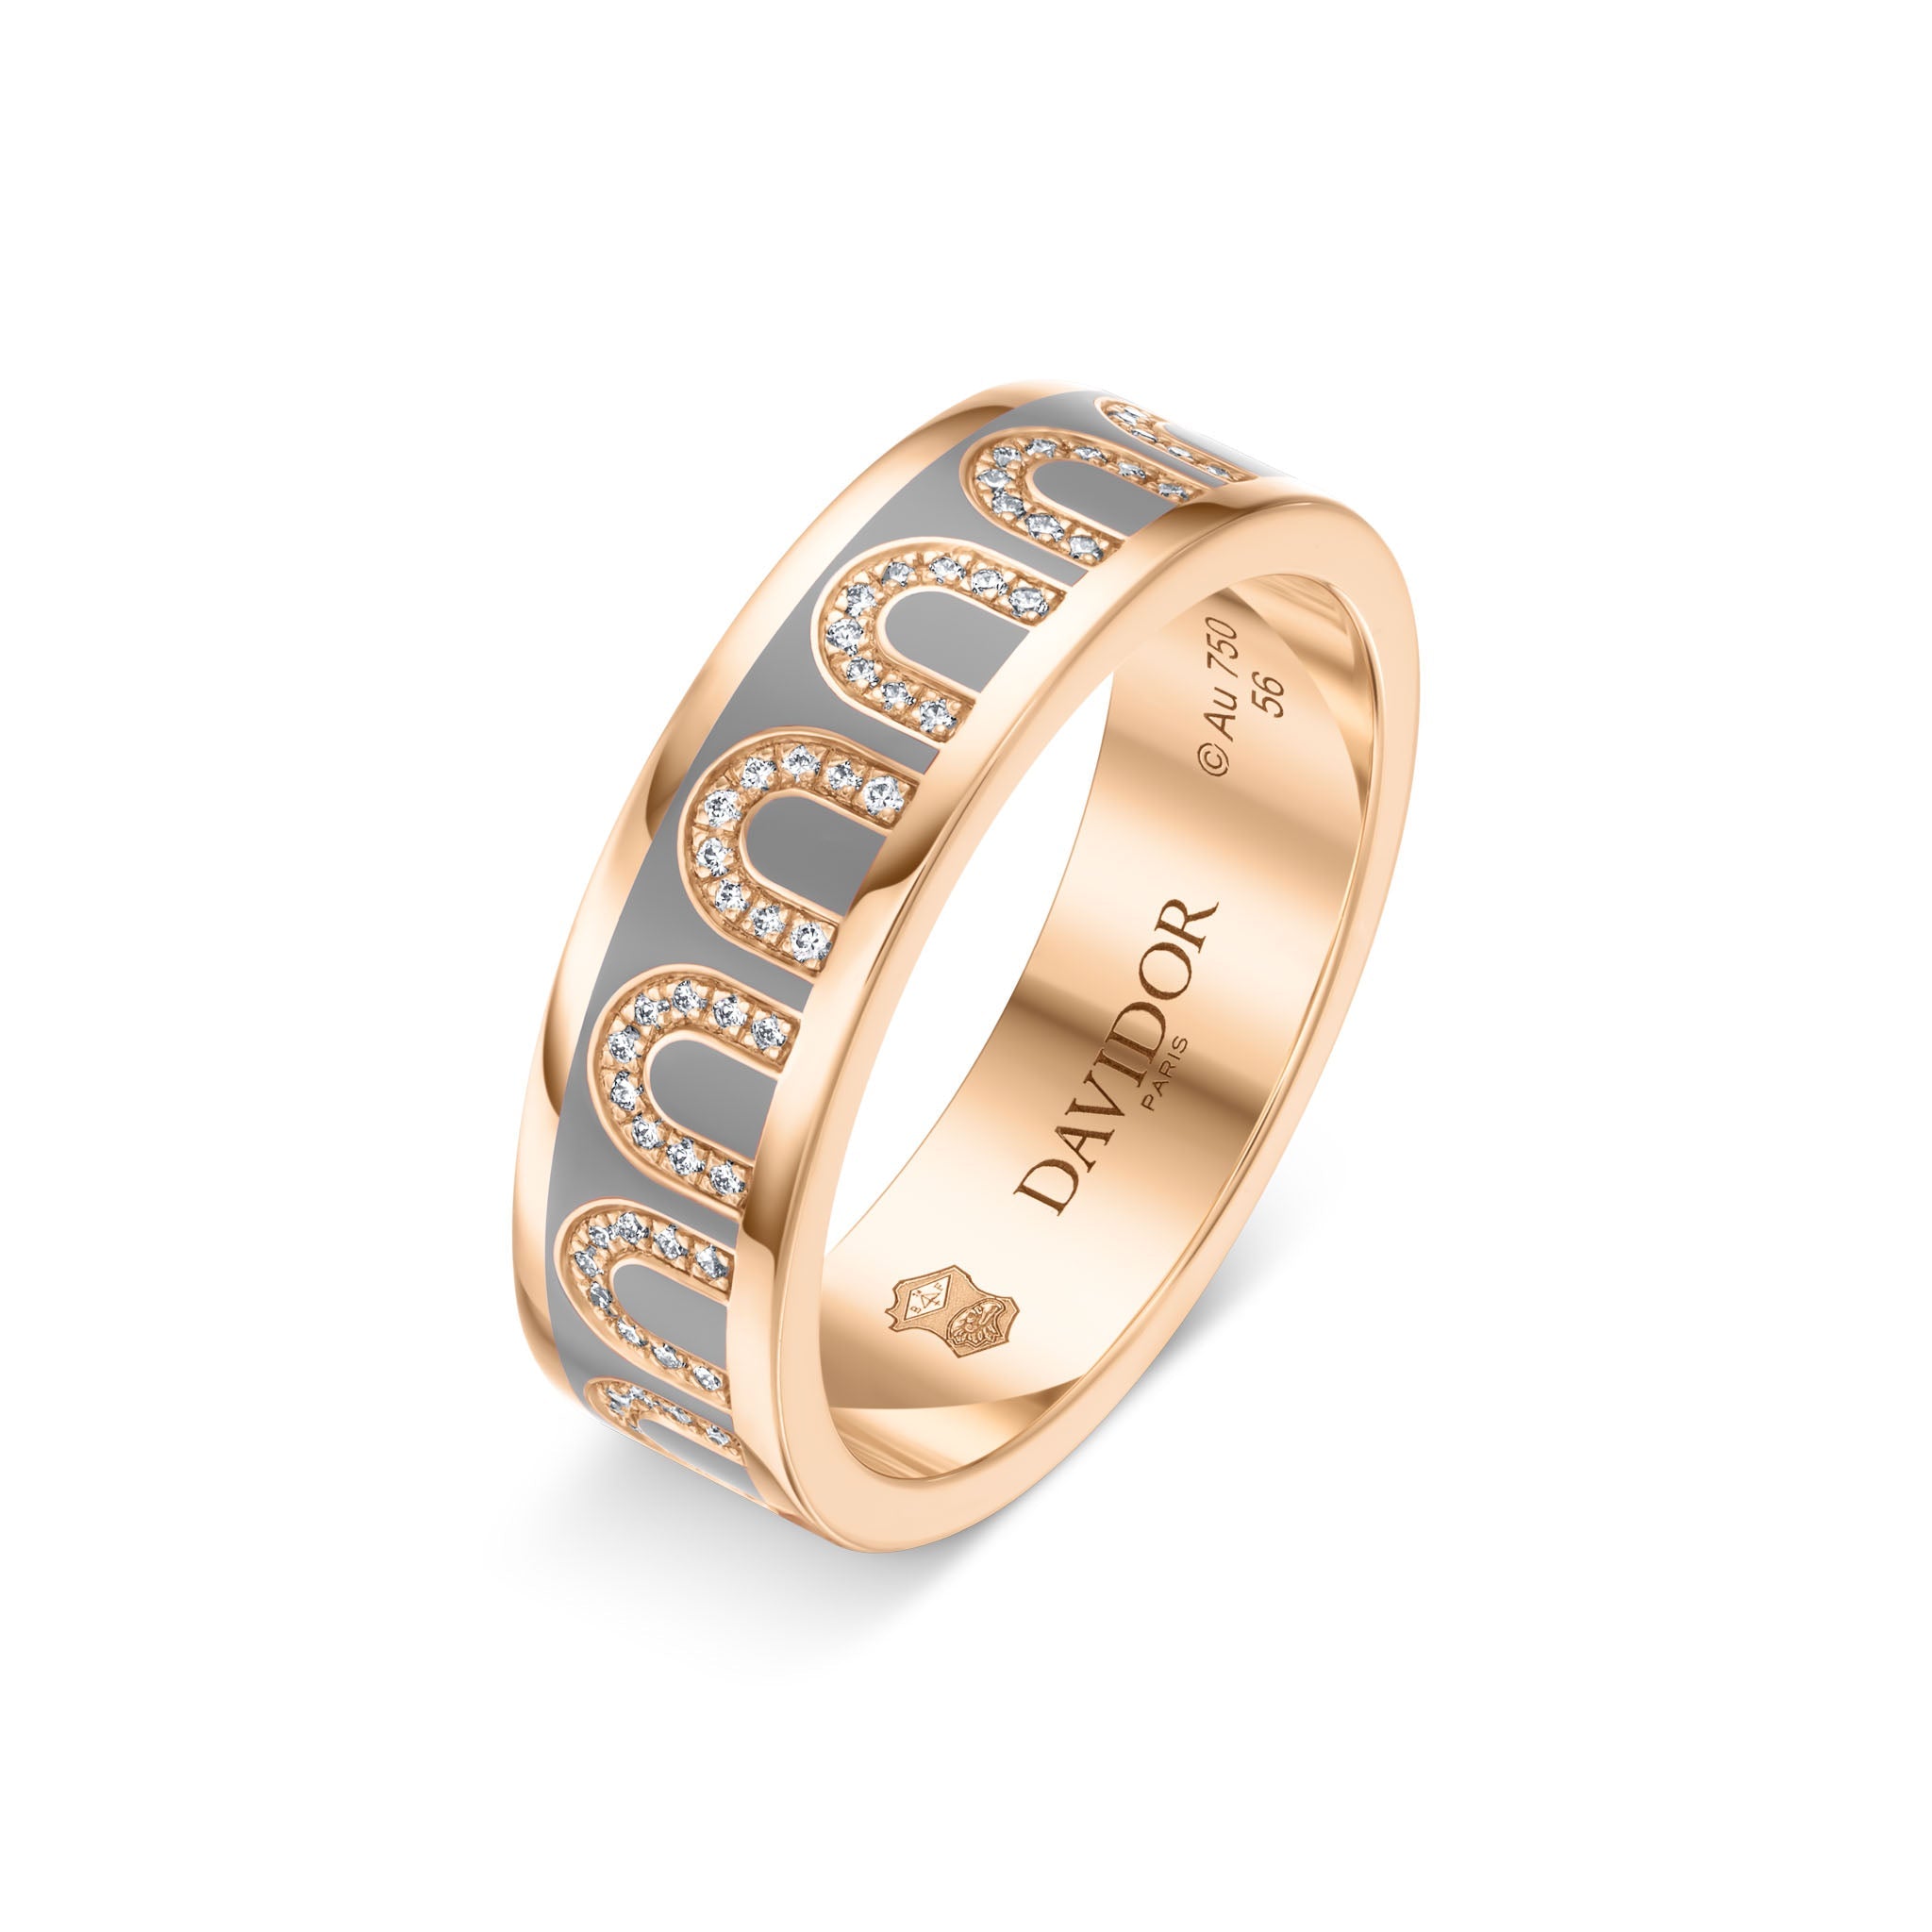 L’Arc de DAVIDOR Ring MM, 18k Rose Gold with Anthracite Lacquered Ceramic and Arcade Diamonds